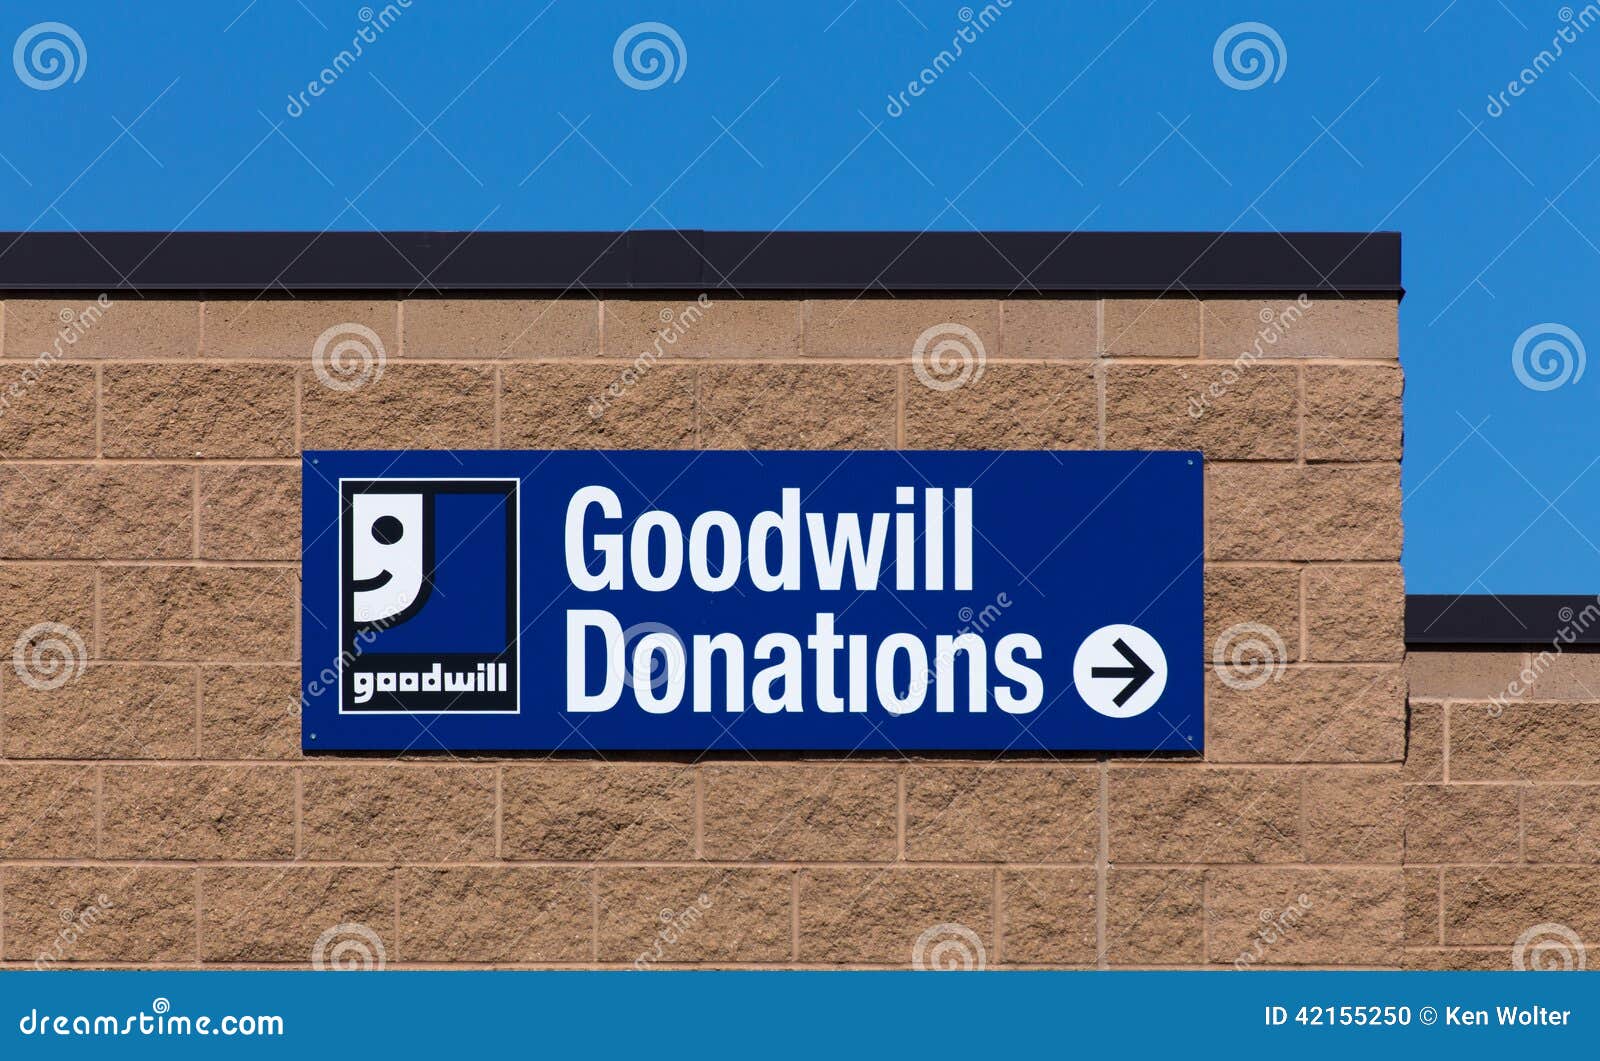 Donate E-Waste for a 10% Discount - Goodwill of Silicon Valley